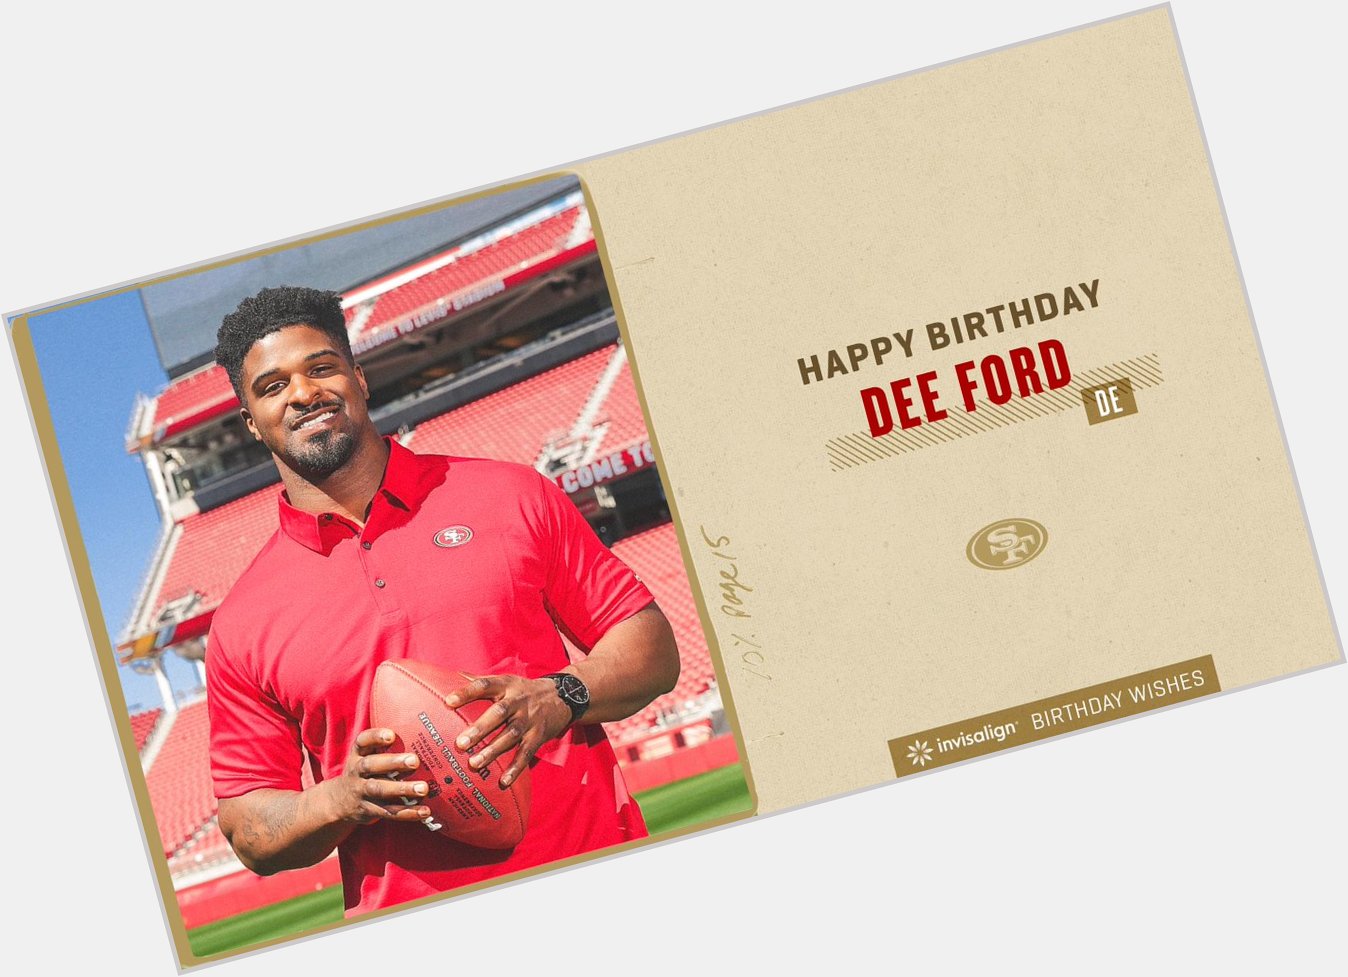 Join us in wishing Dee Ford a very happy birthday! 